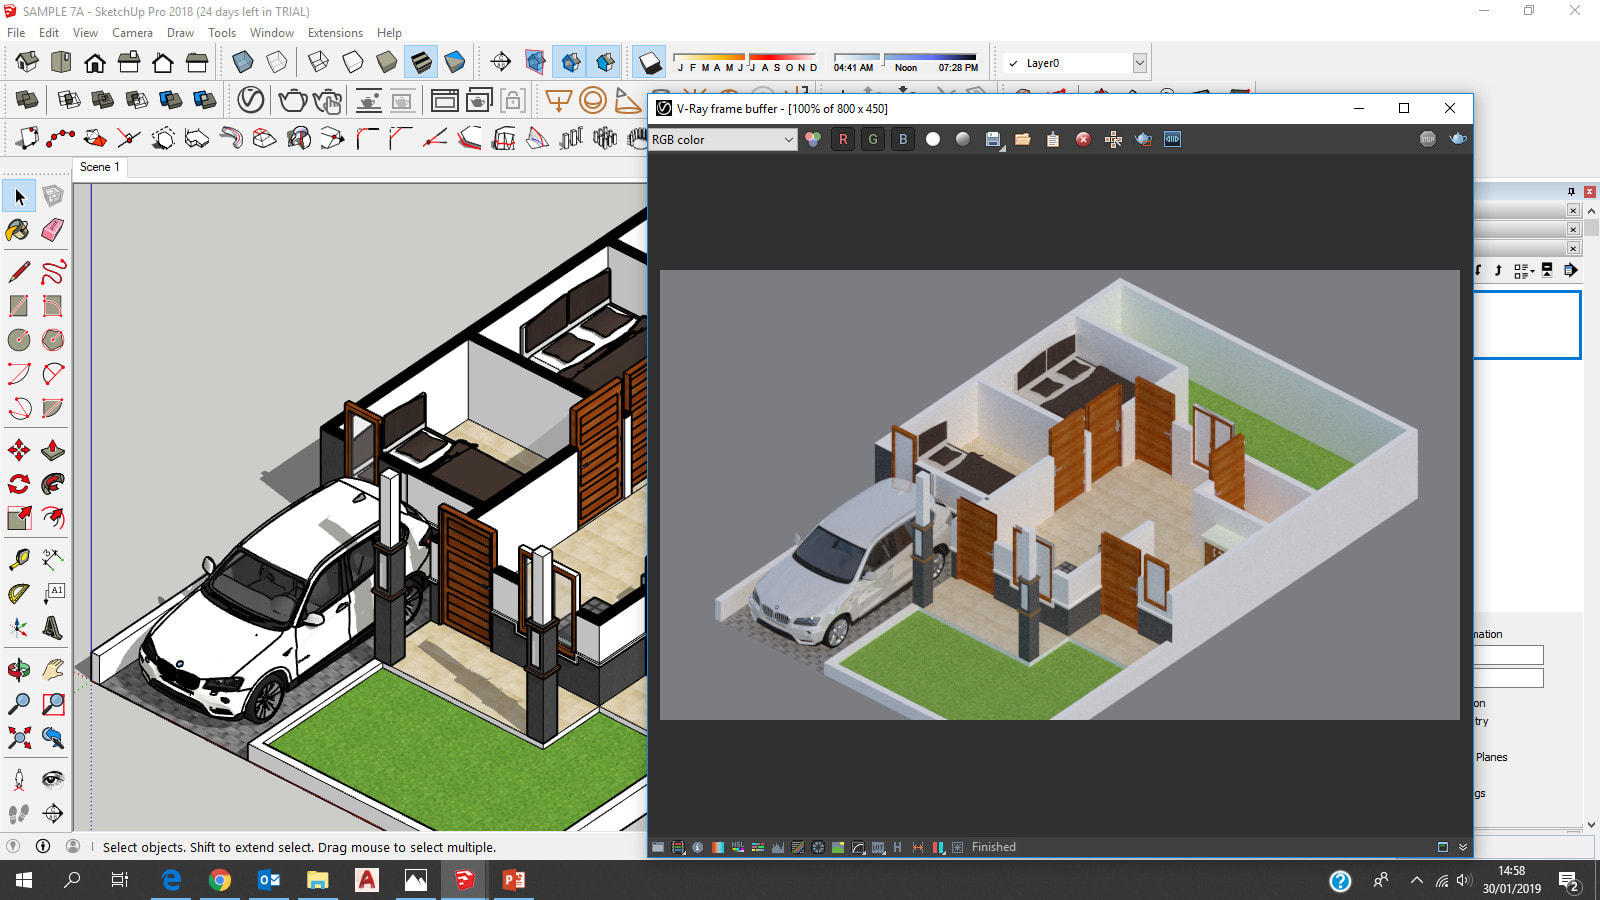 sketchup pro 2018 download trial